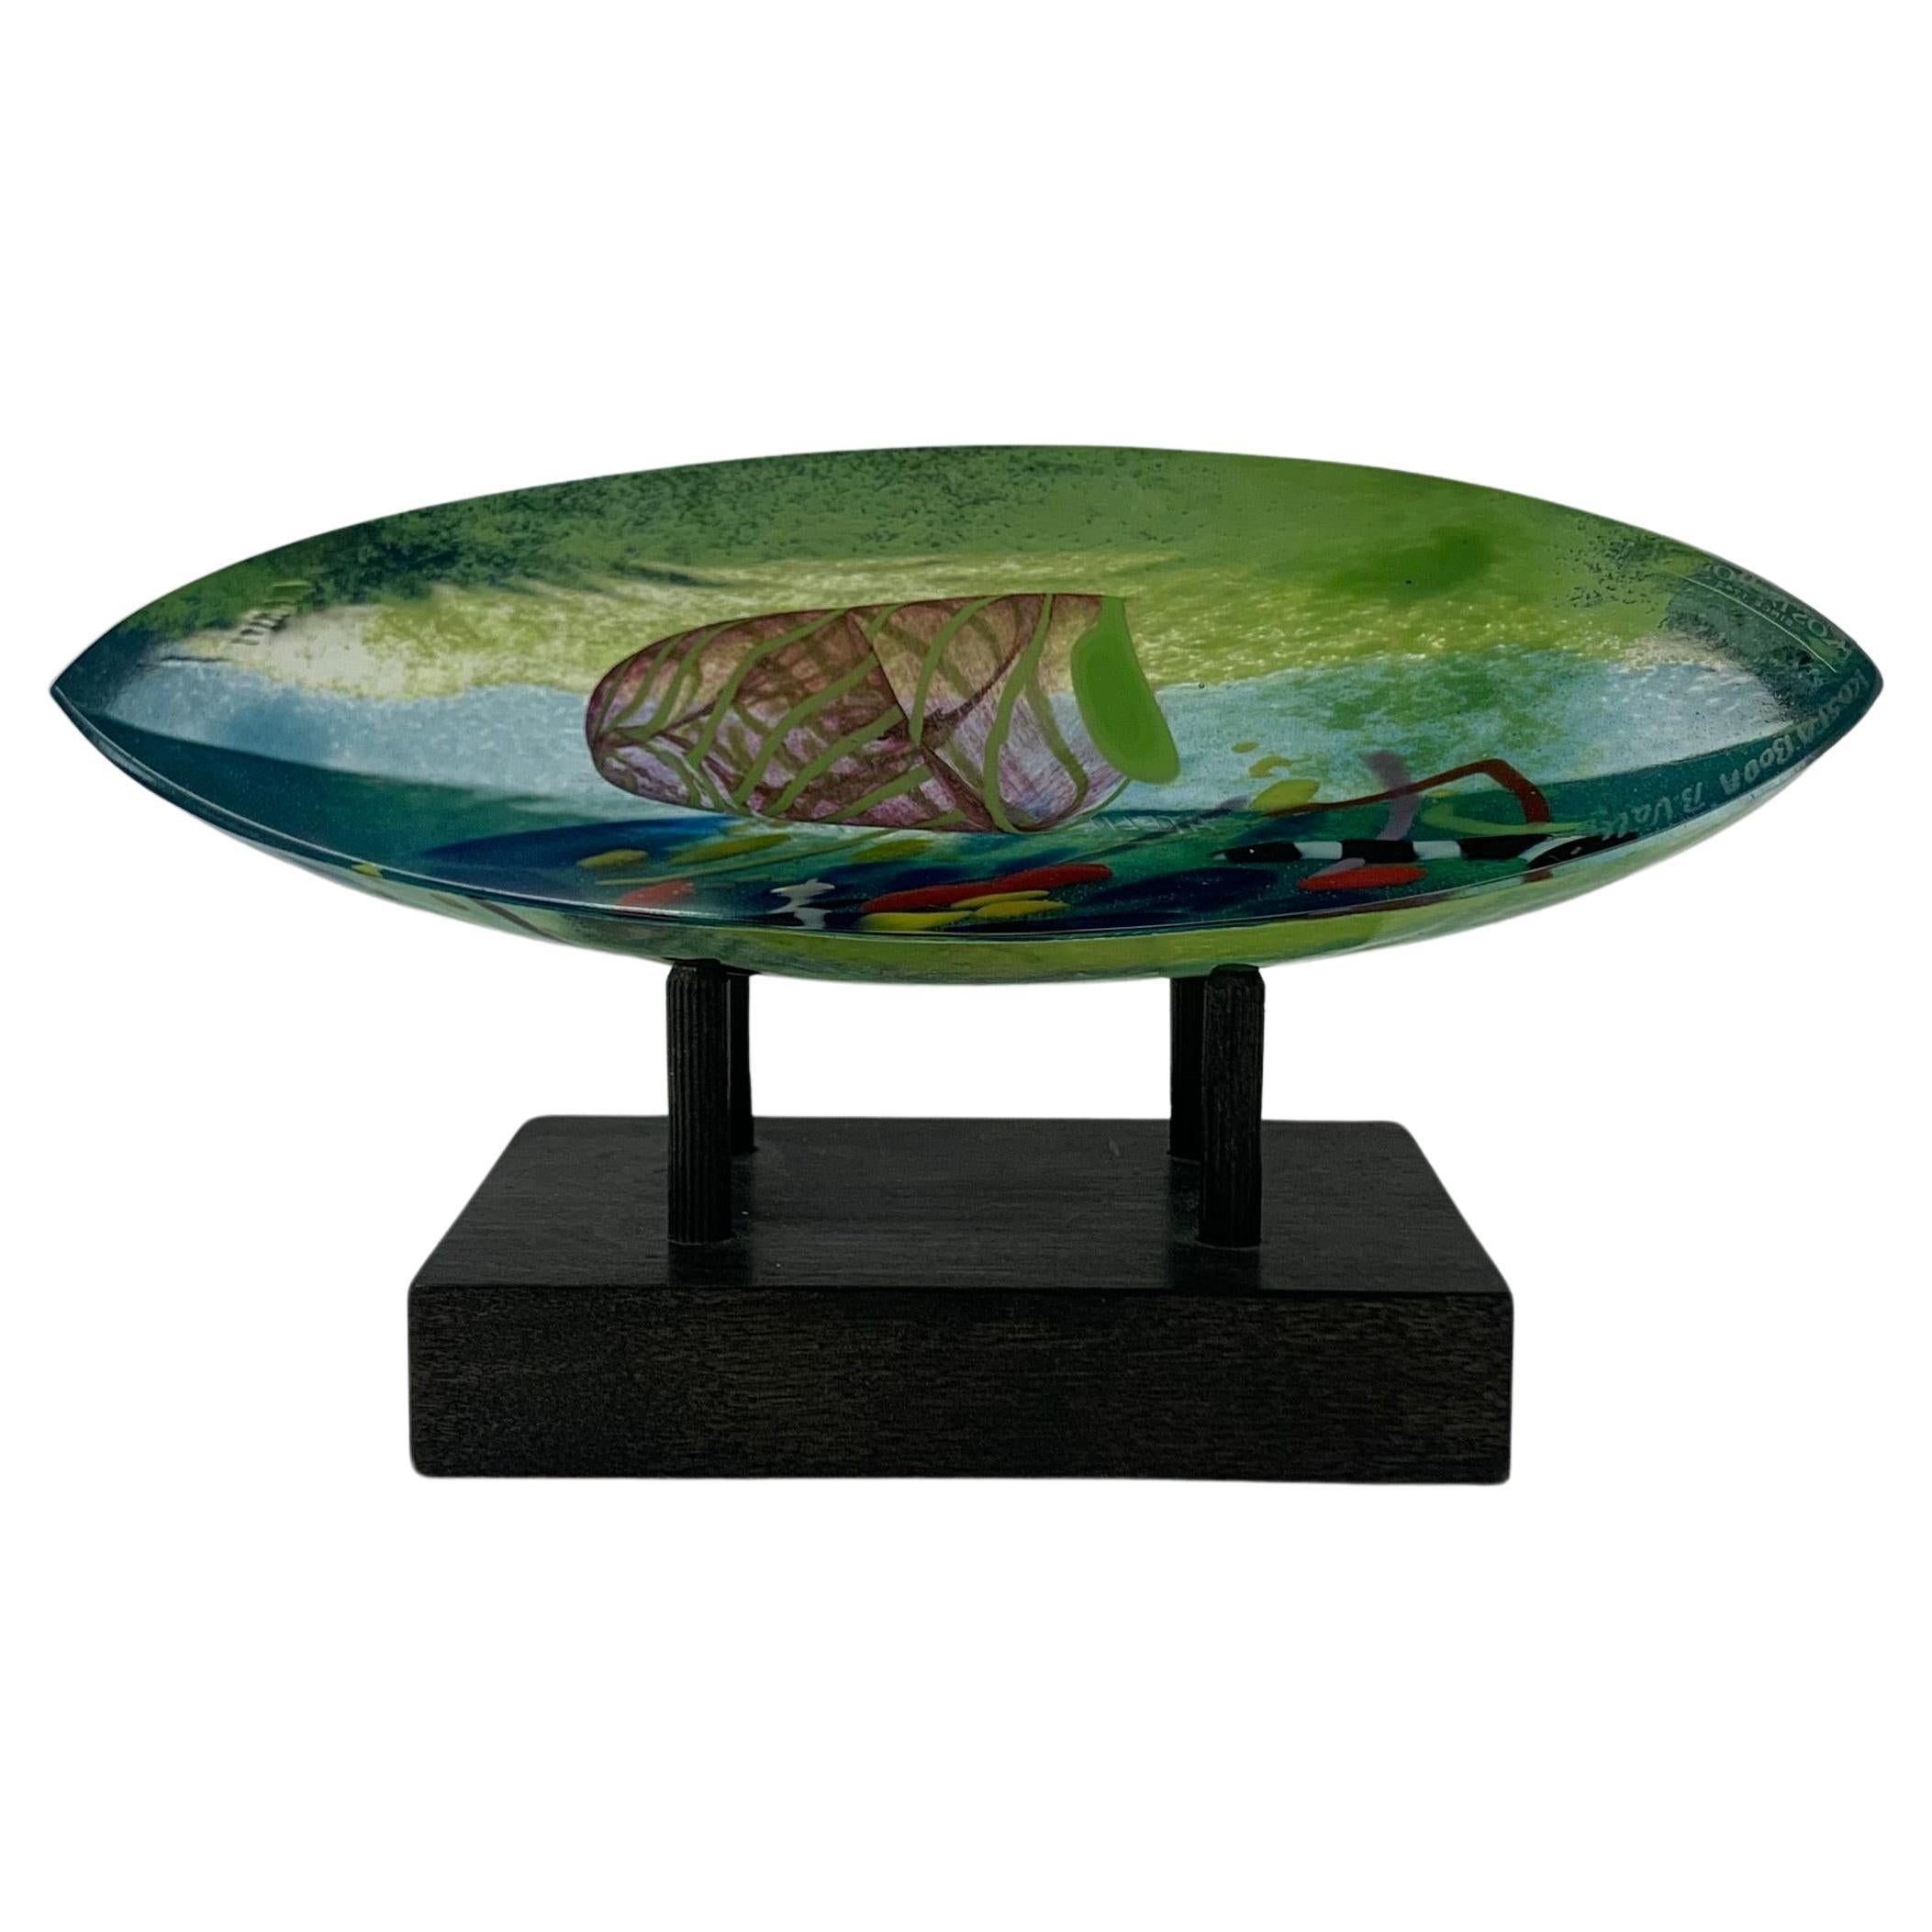 Bertil Vallien for Kosta Boda Boat Atelier Collection limited edition For Sale